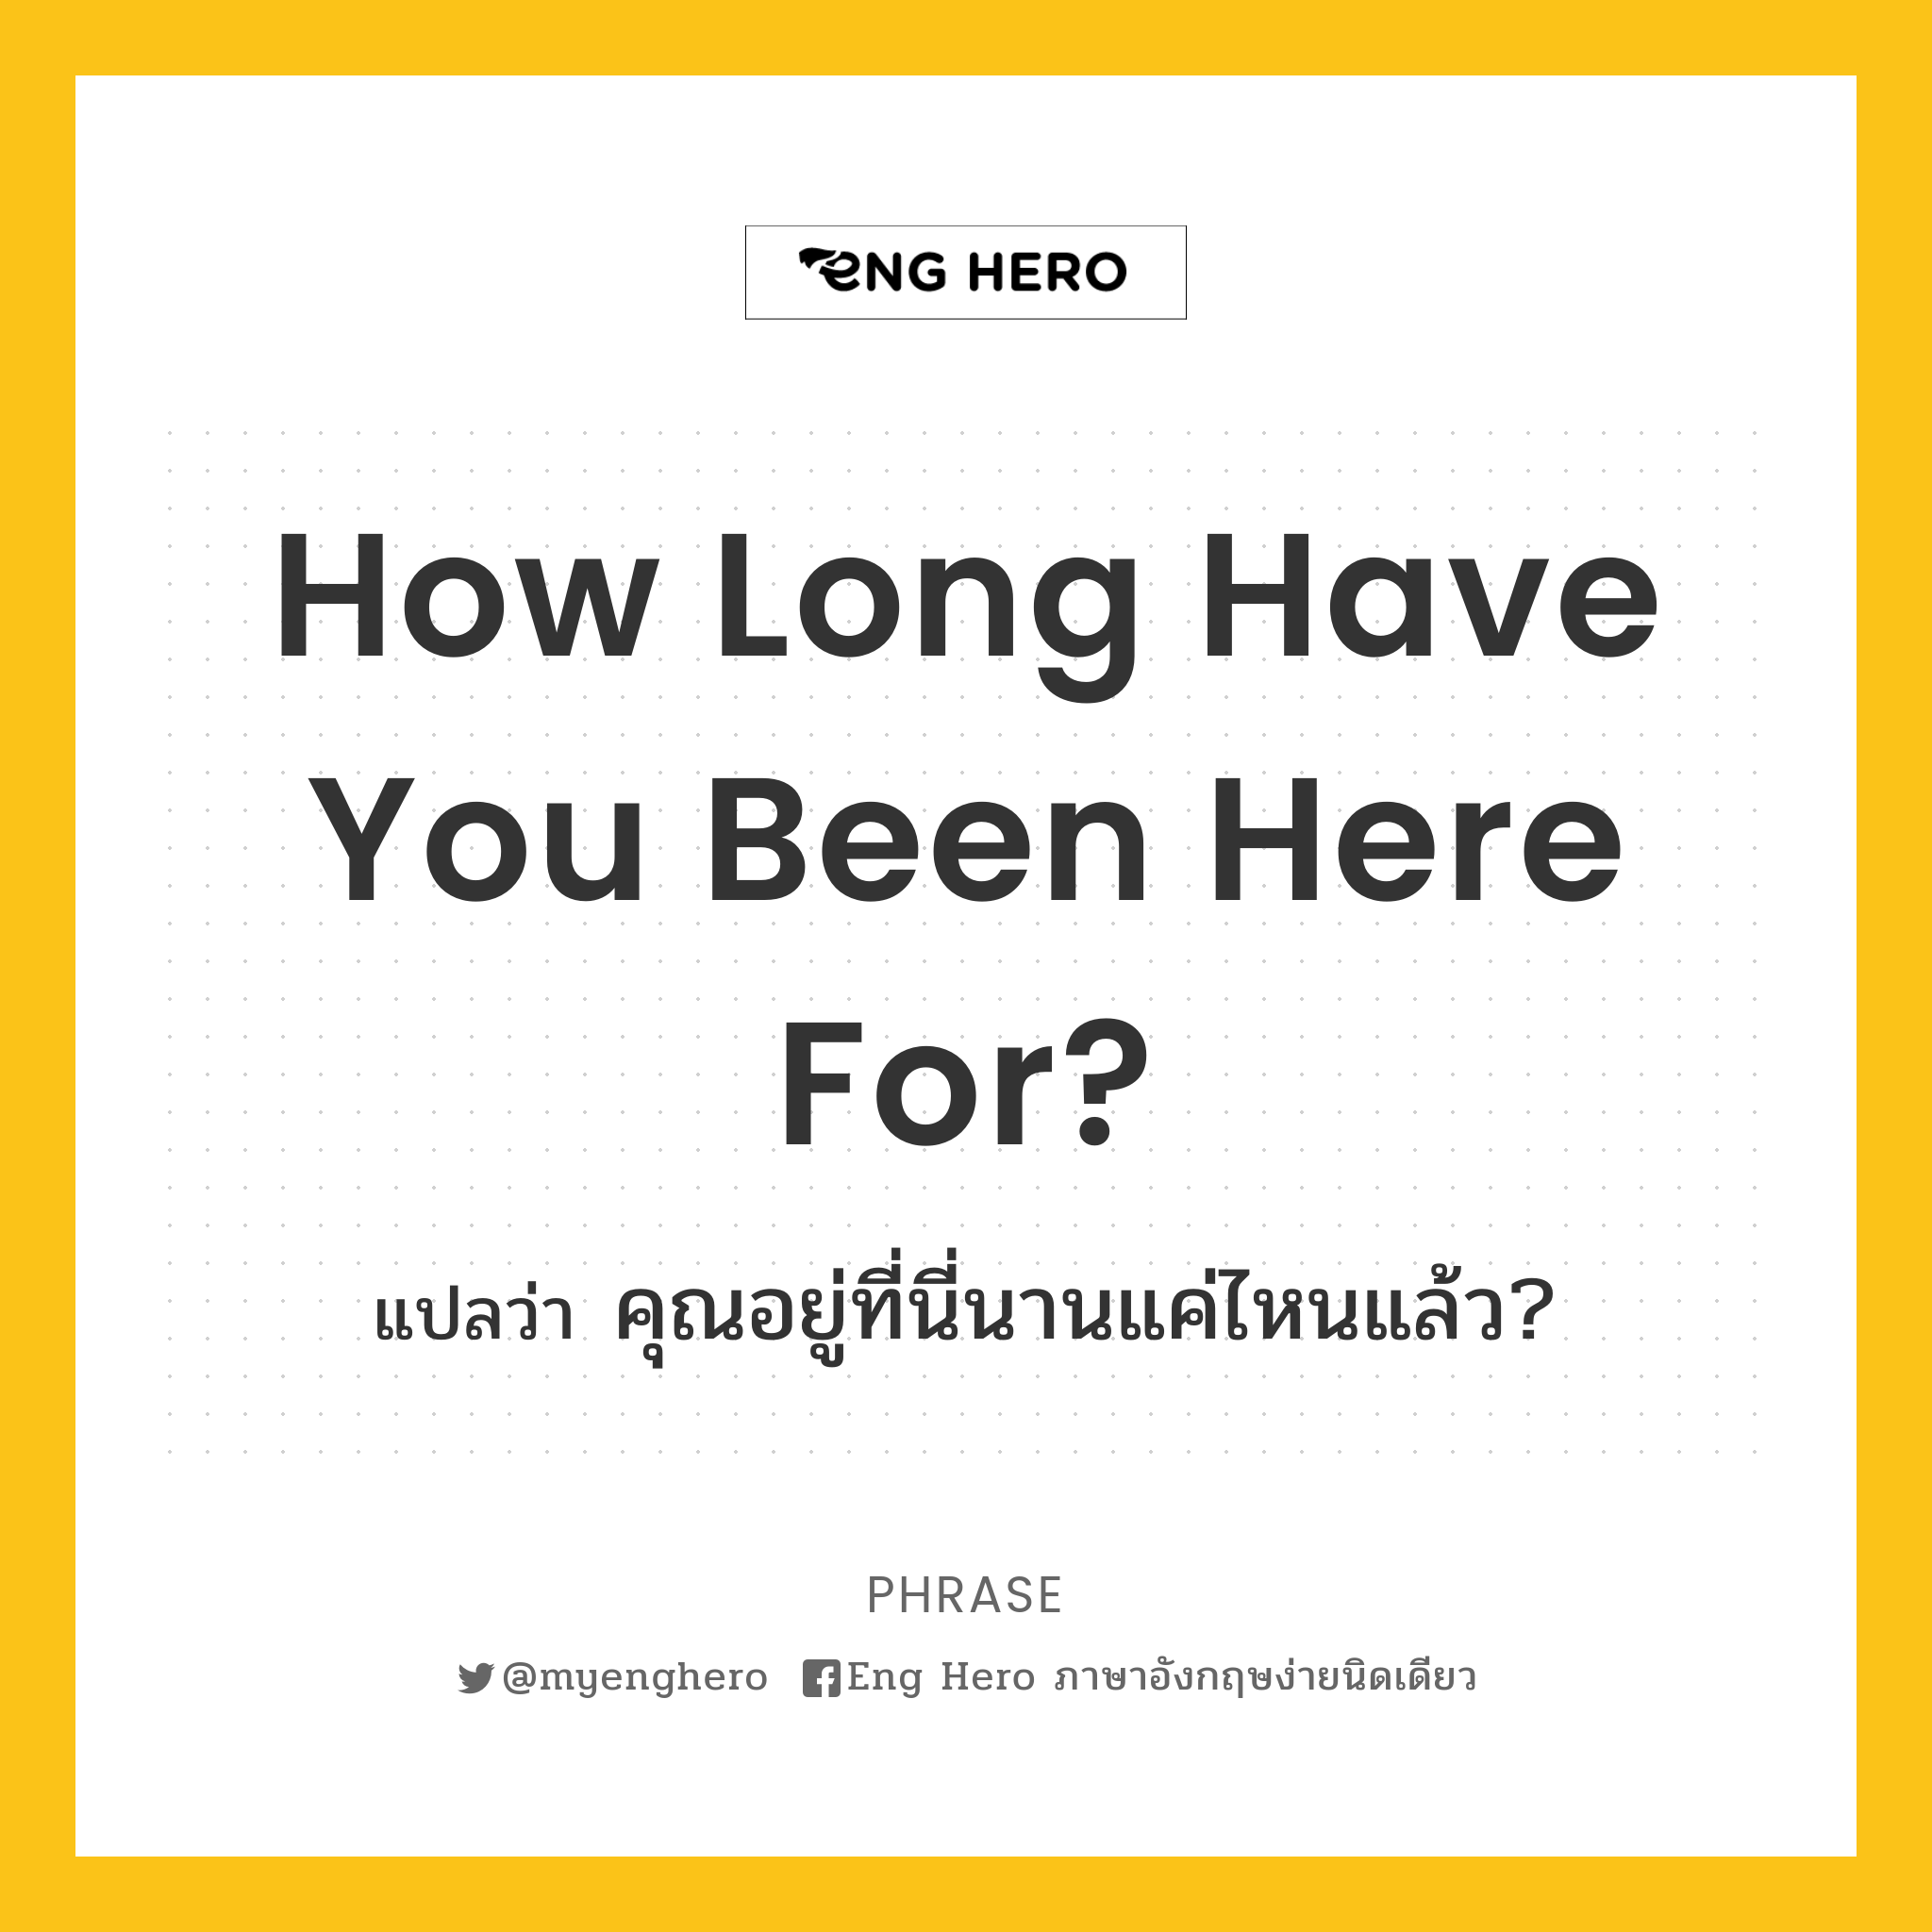 How long have you been here for?